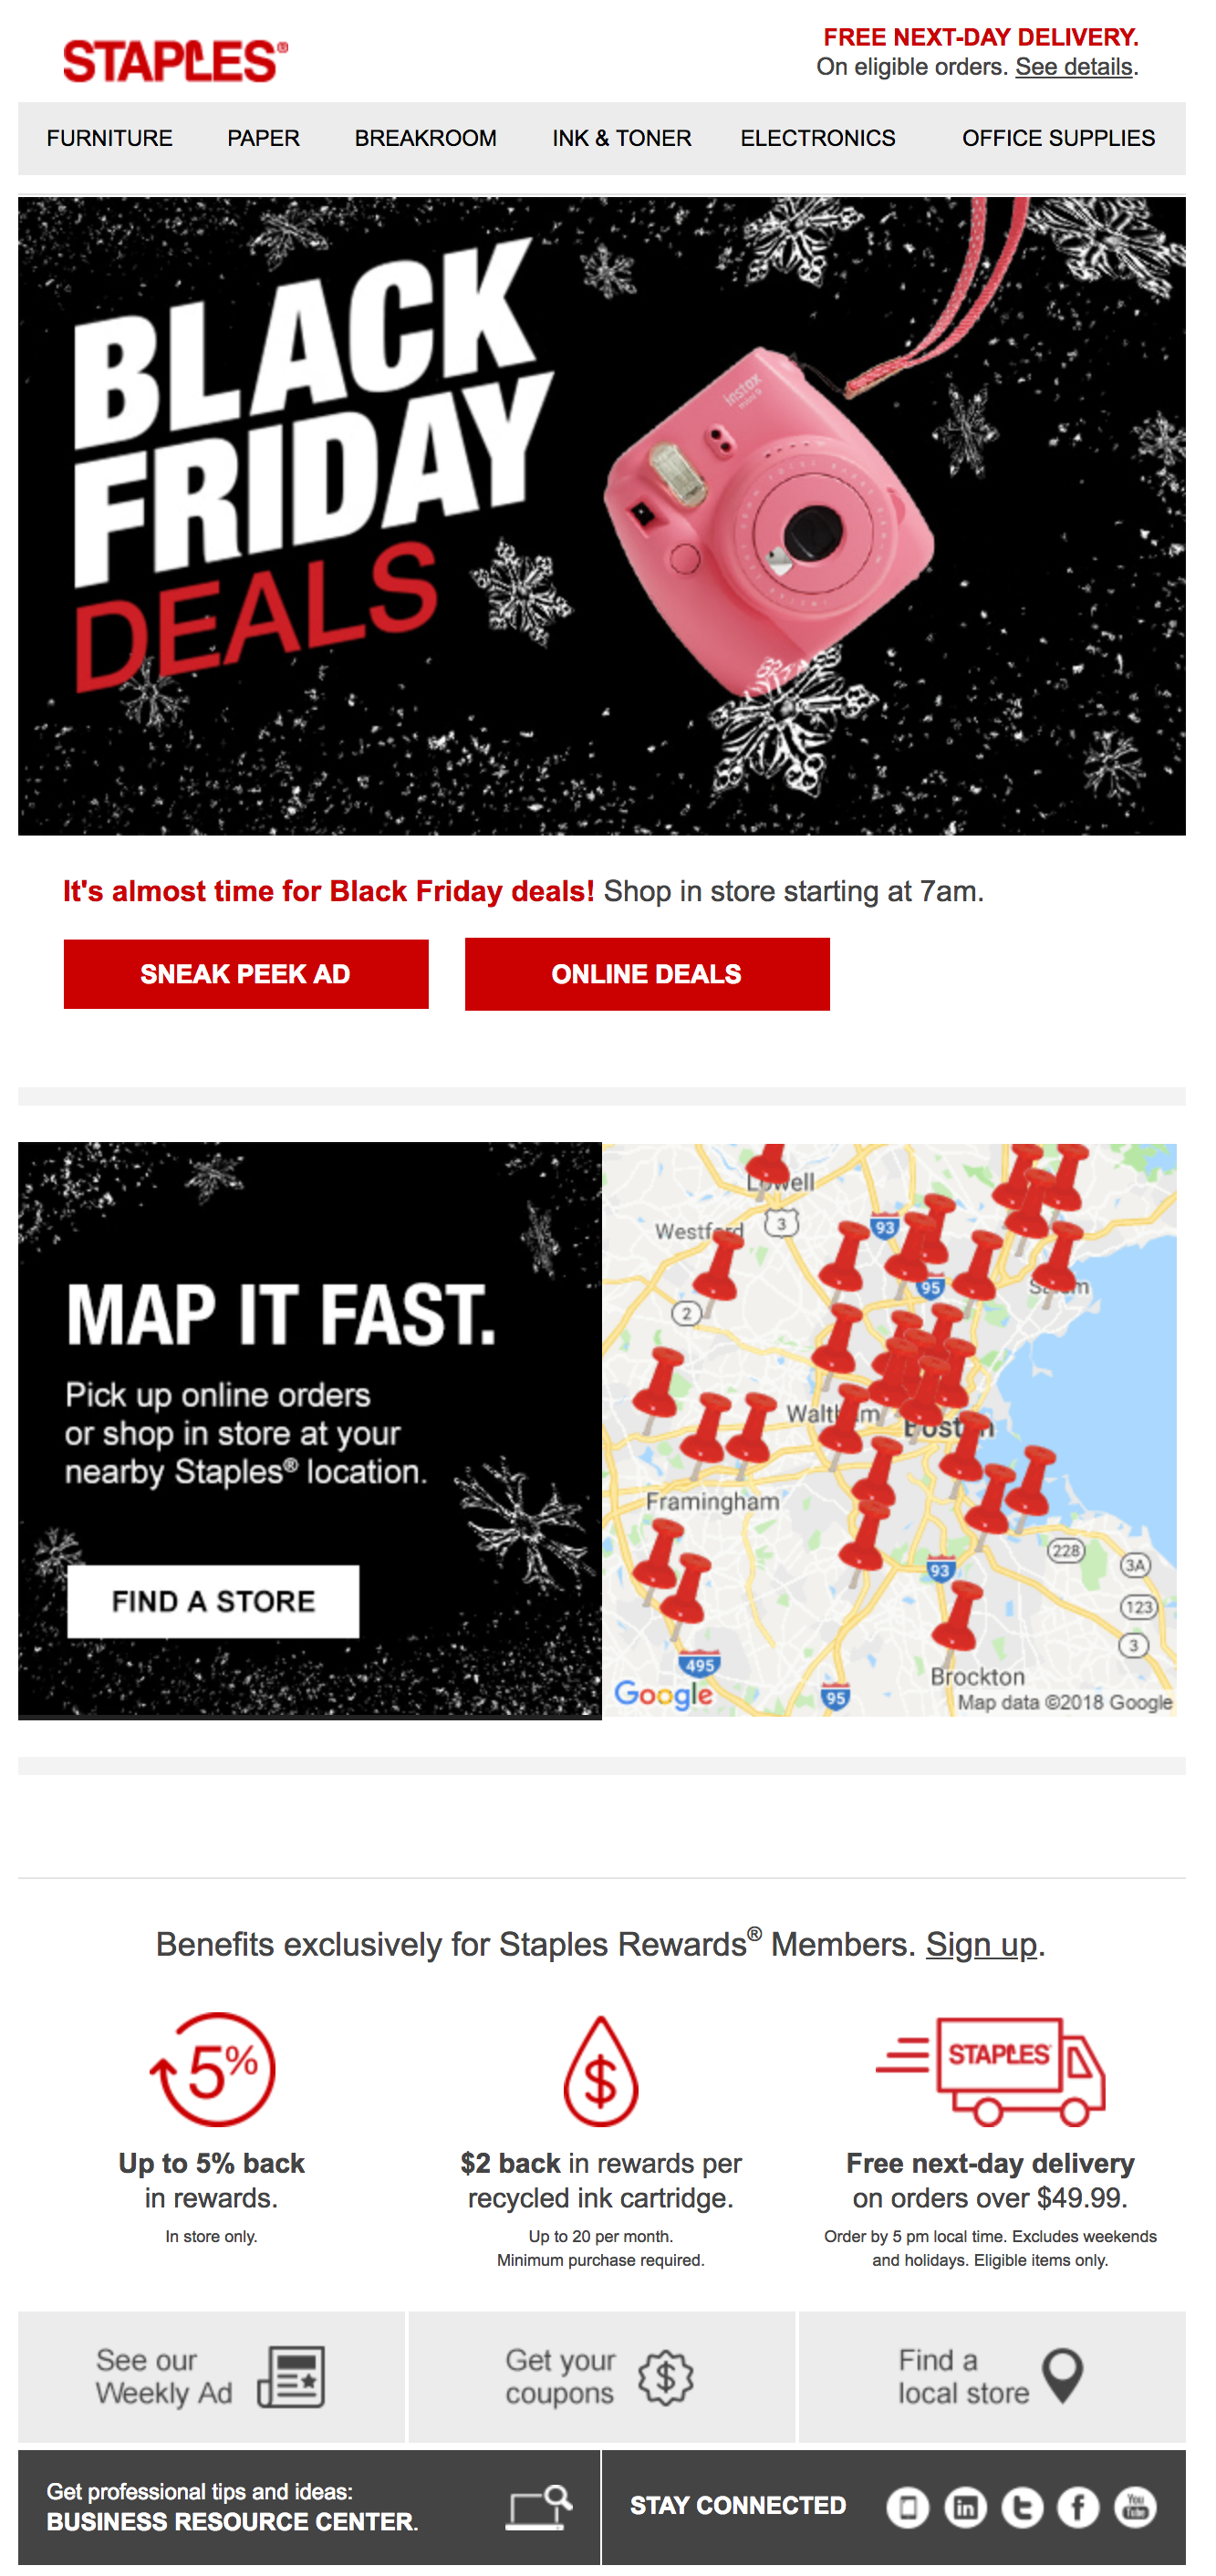 Staples Nearest Store in email